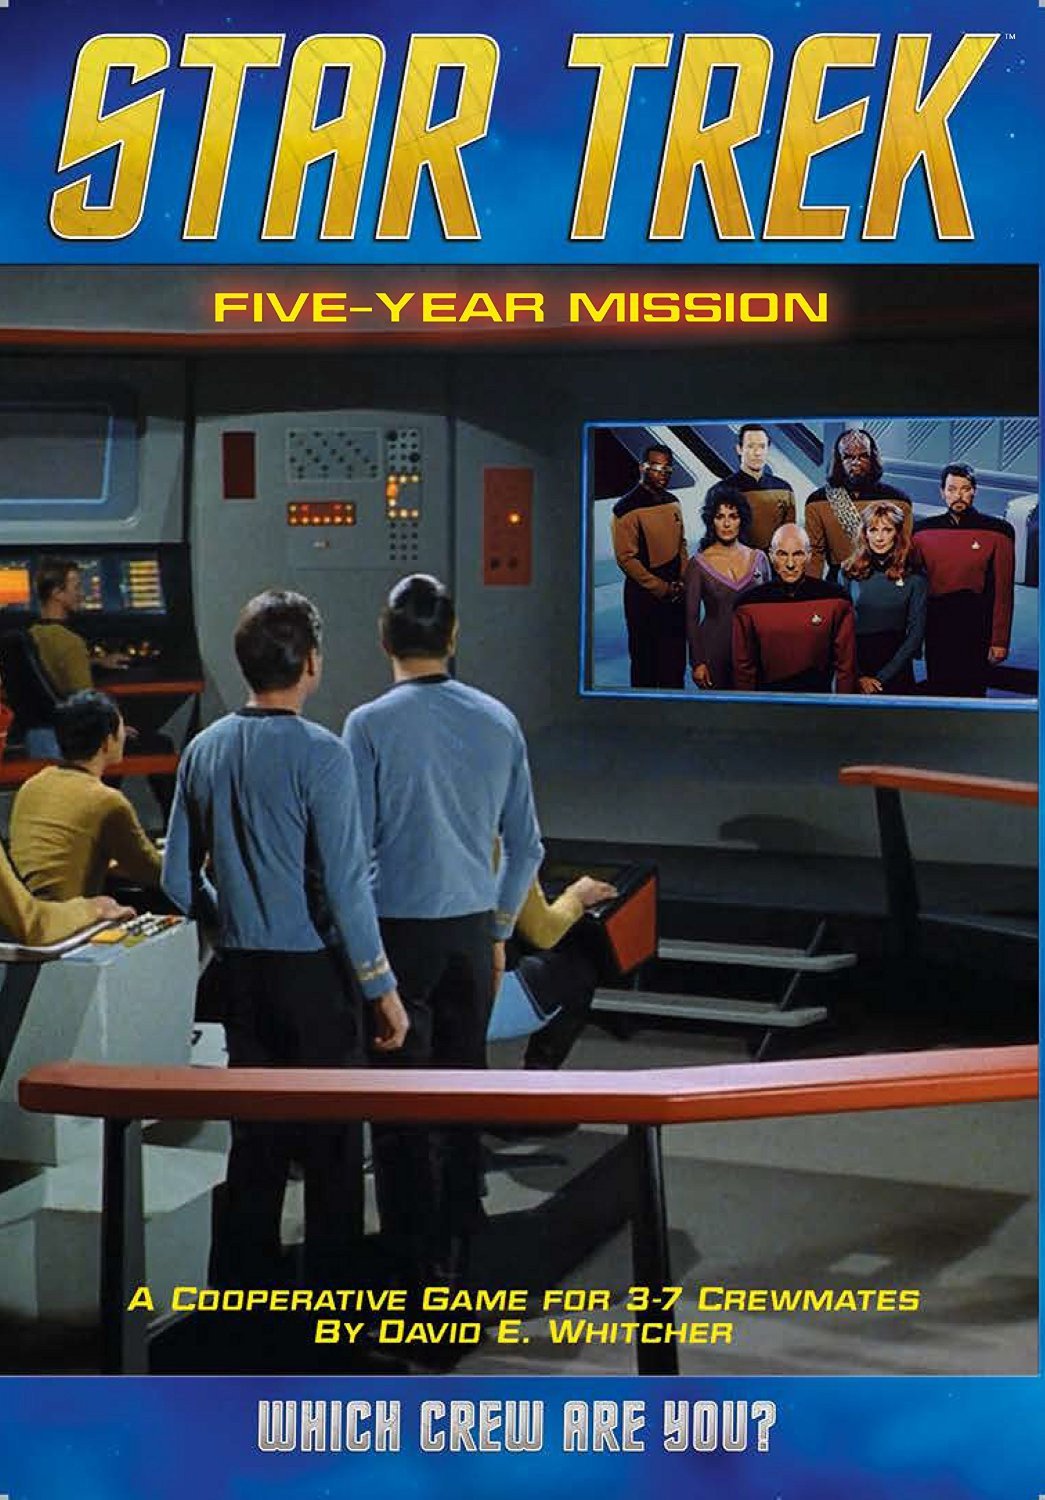 Mayfair Star Trek: Five-Year Mission Game - image 1 of 2